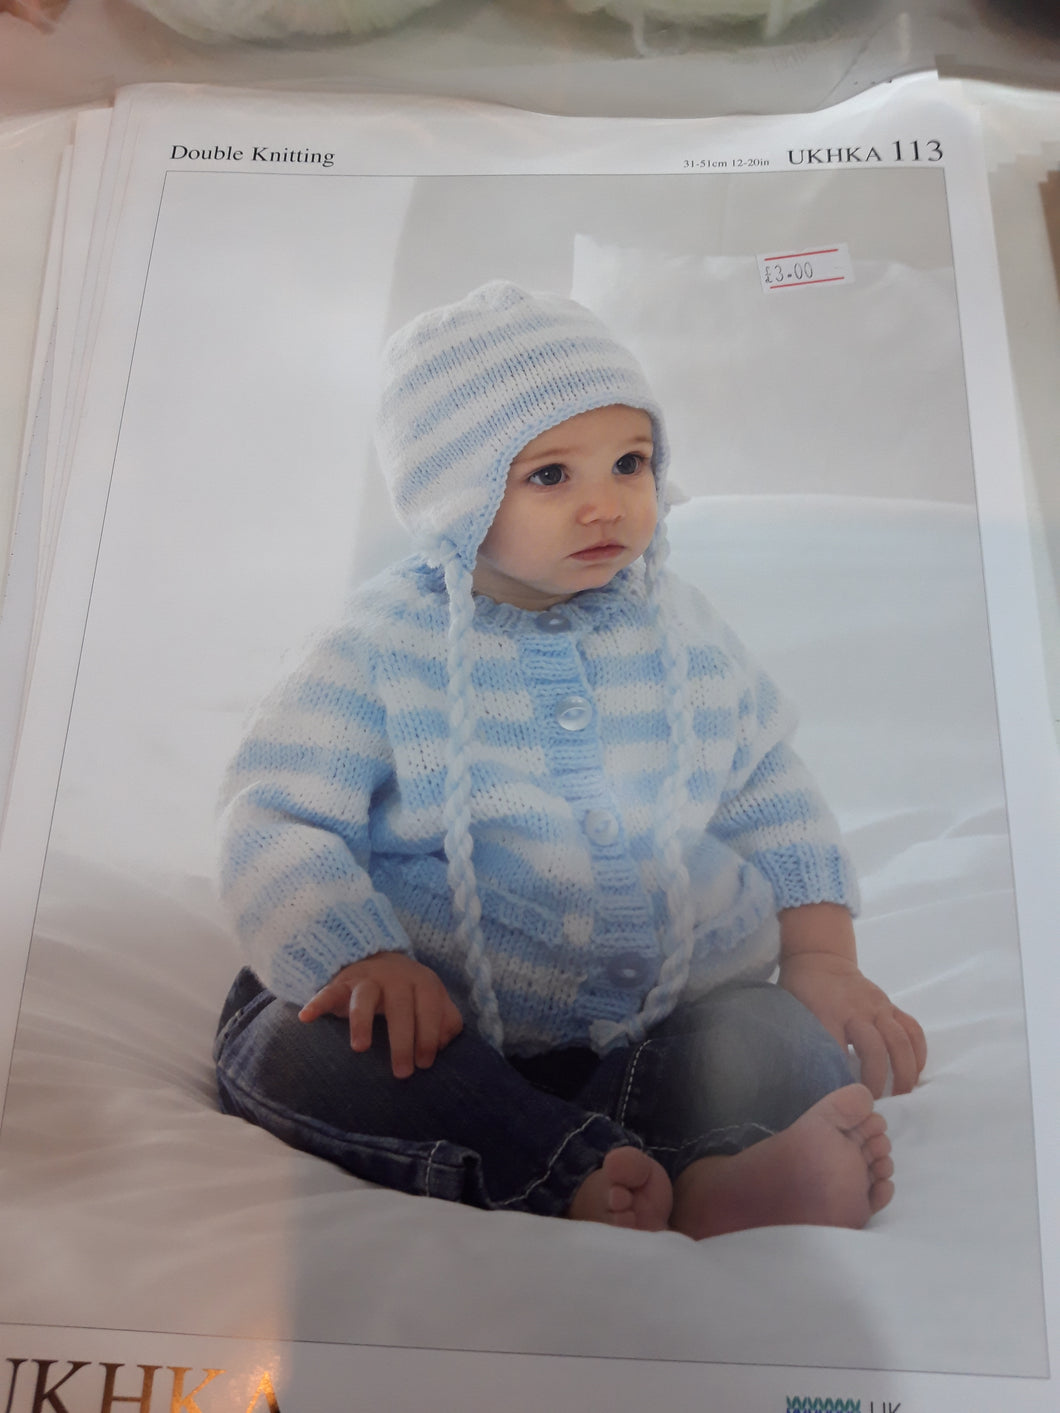 UKHKA 113 - Baby Double Knit - Cardigan, Hat and Scarf - 12